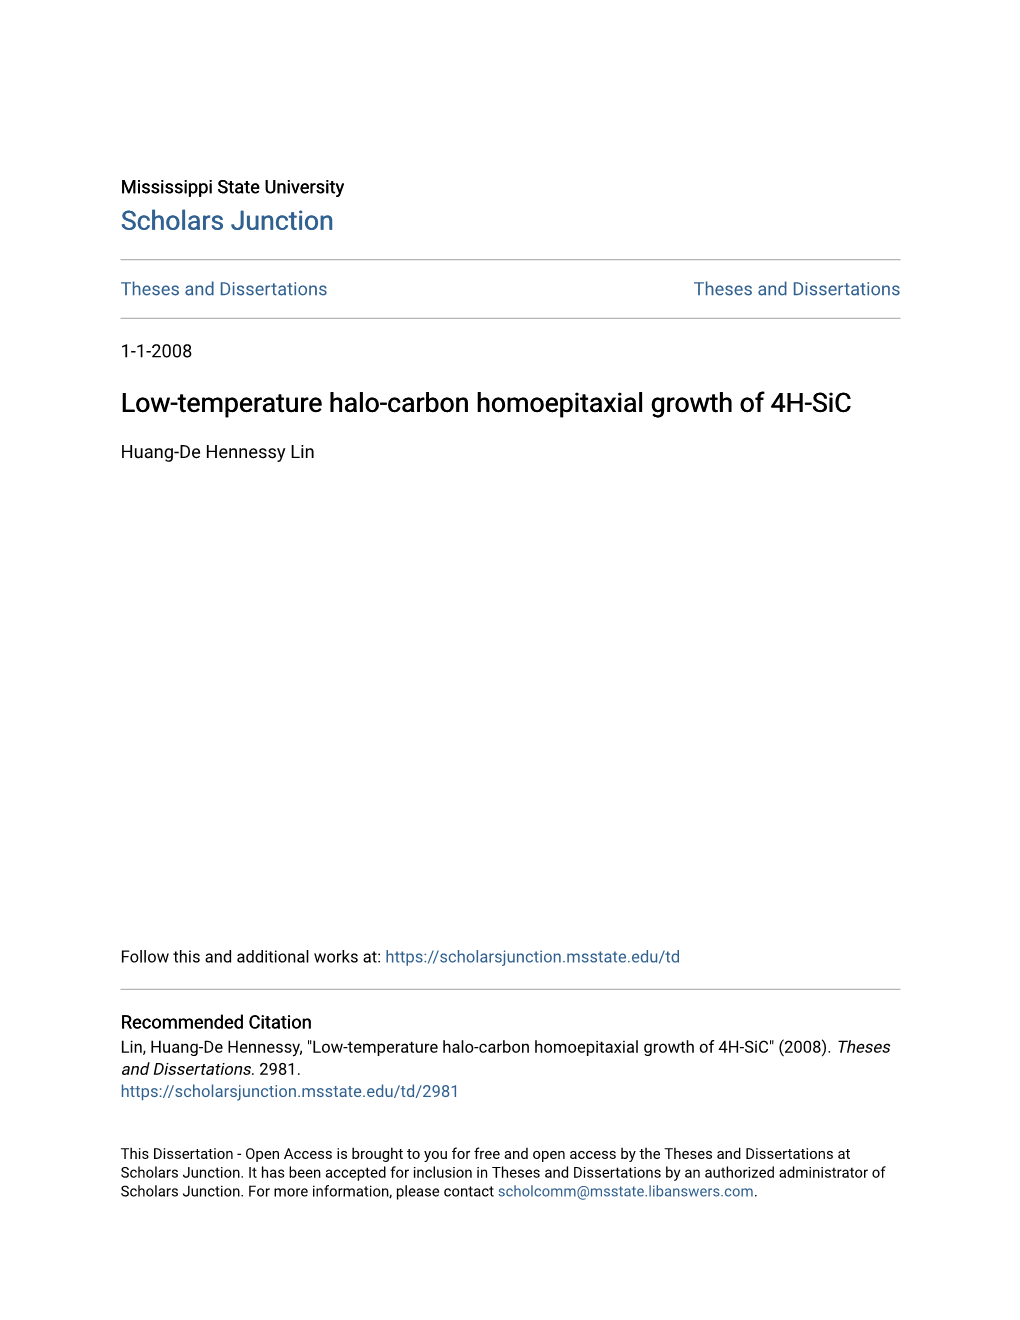 Low-Temperature Halo-Carbon Homoepitaxial Growth of 4H-Sic